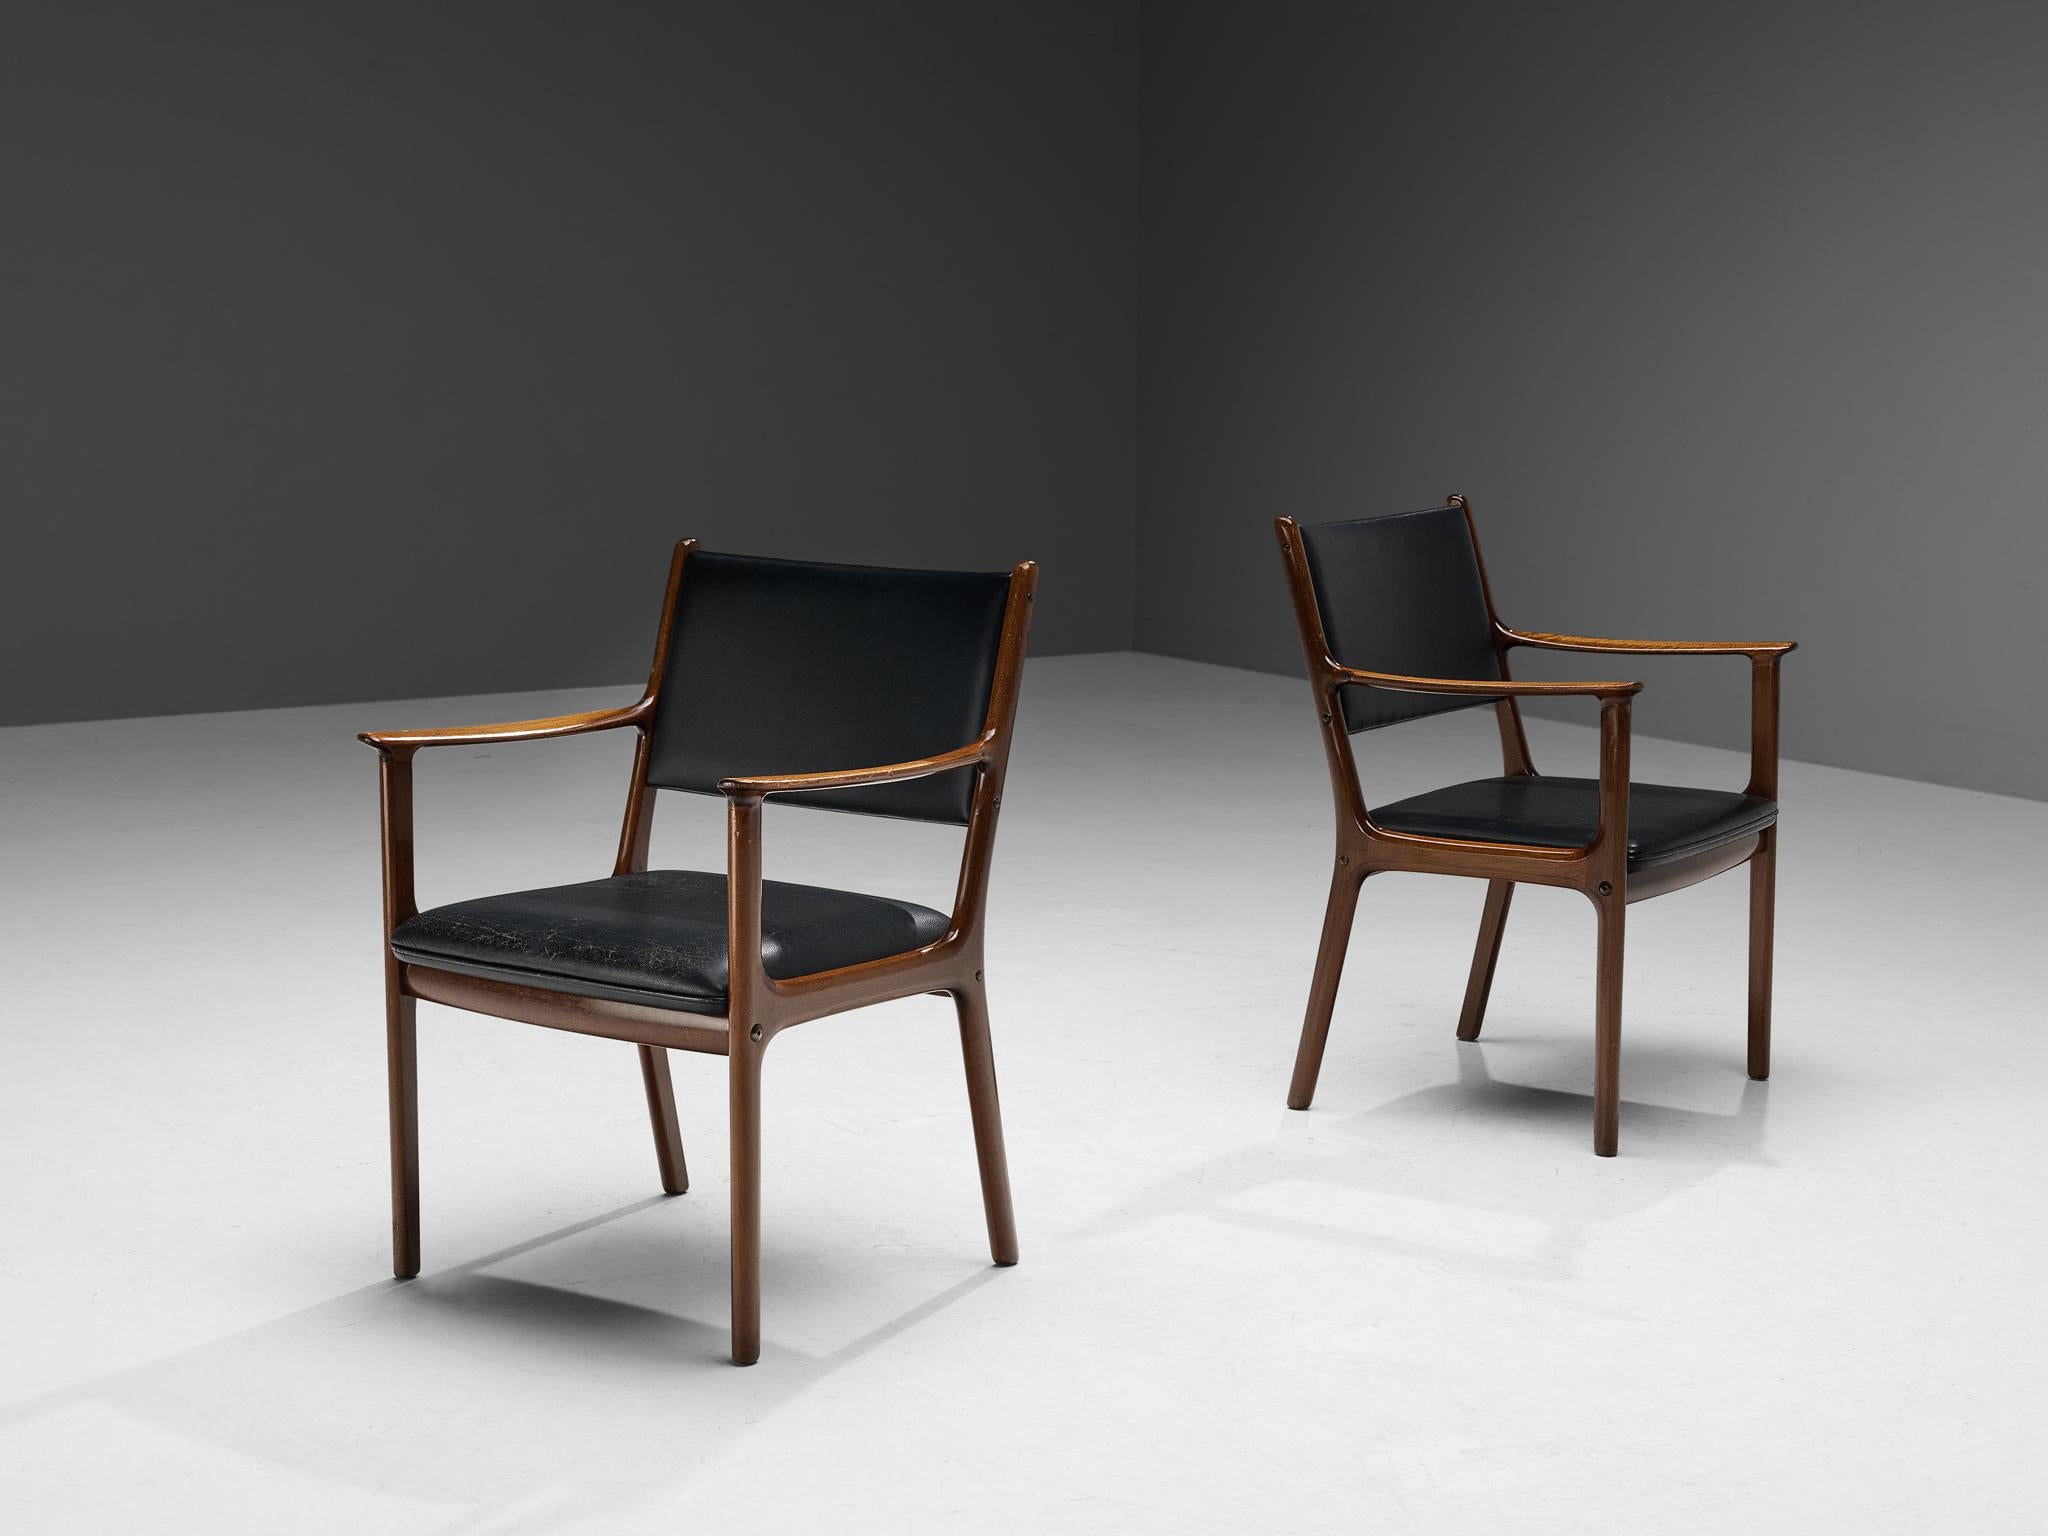 Danish Ole Wanscher for Poul Jeppesen Pair of Armchairs in Teak and Black Leather